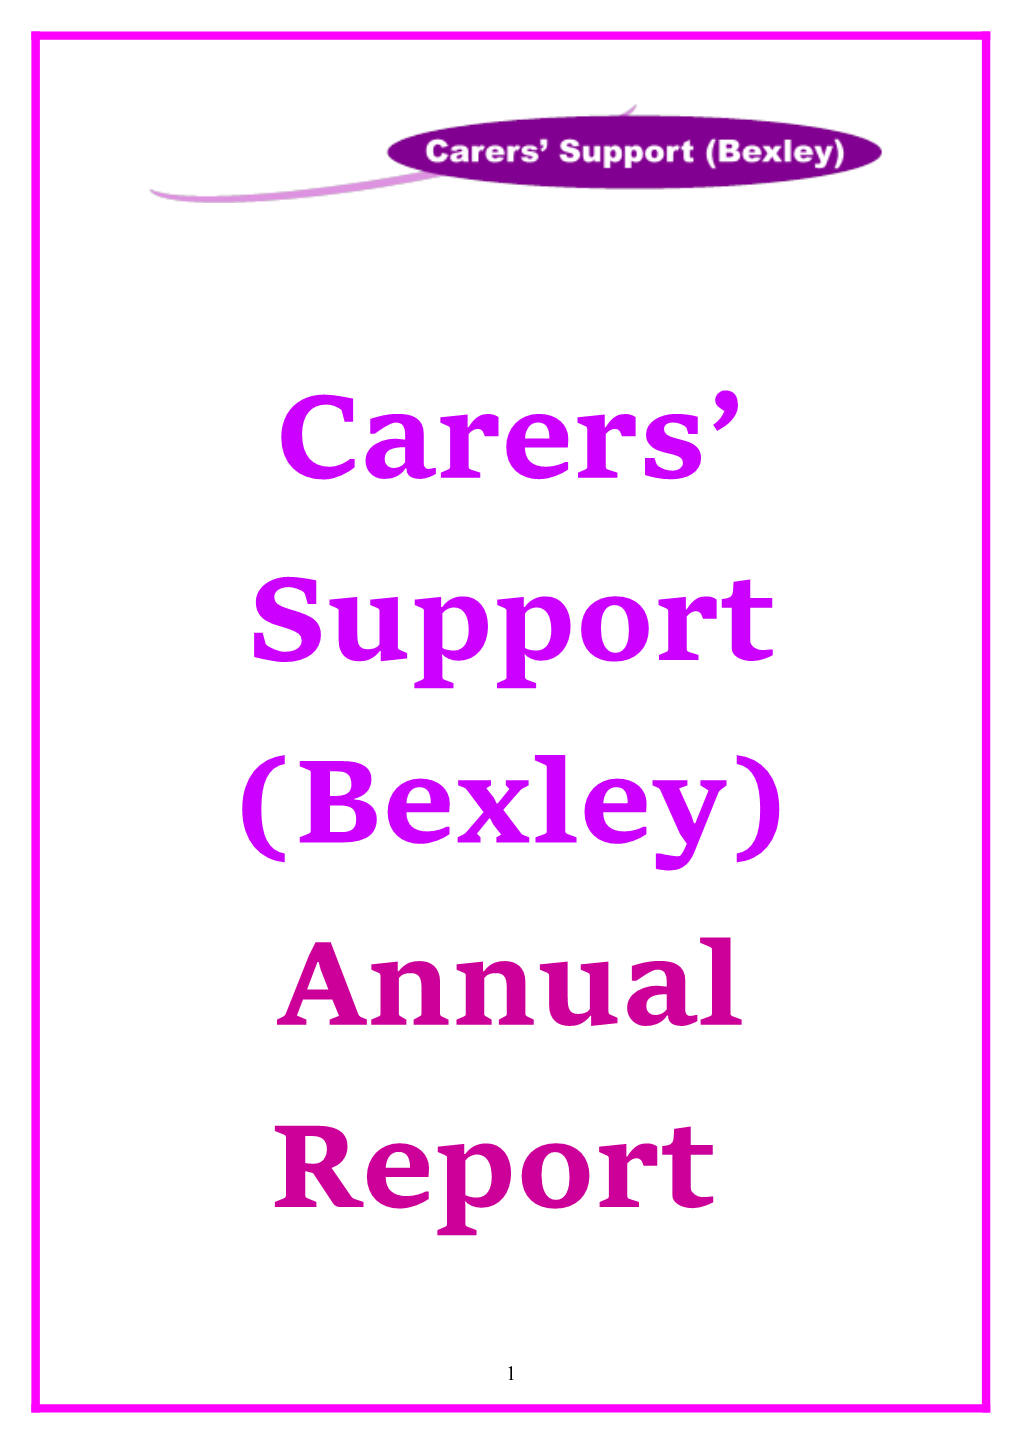 Carers Support (Bexley)